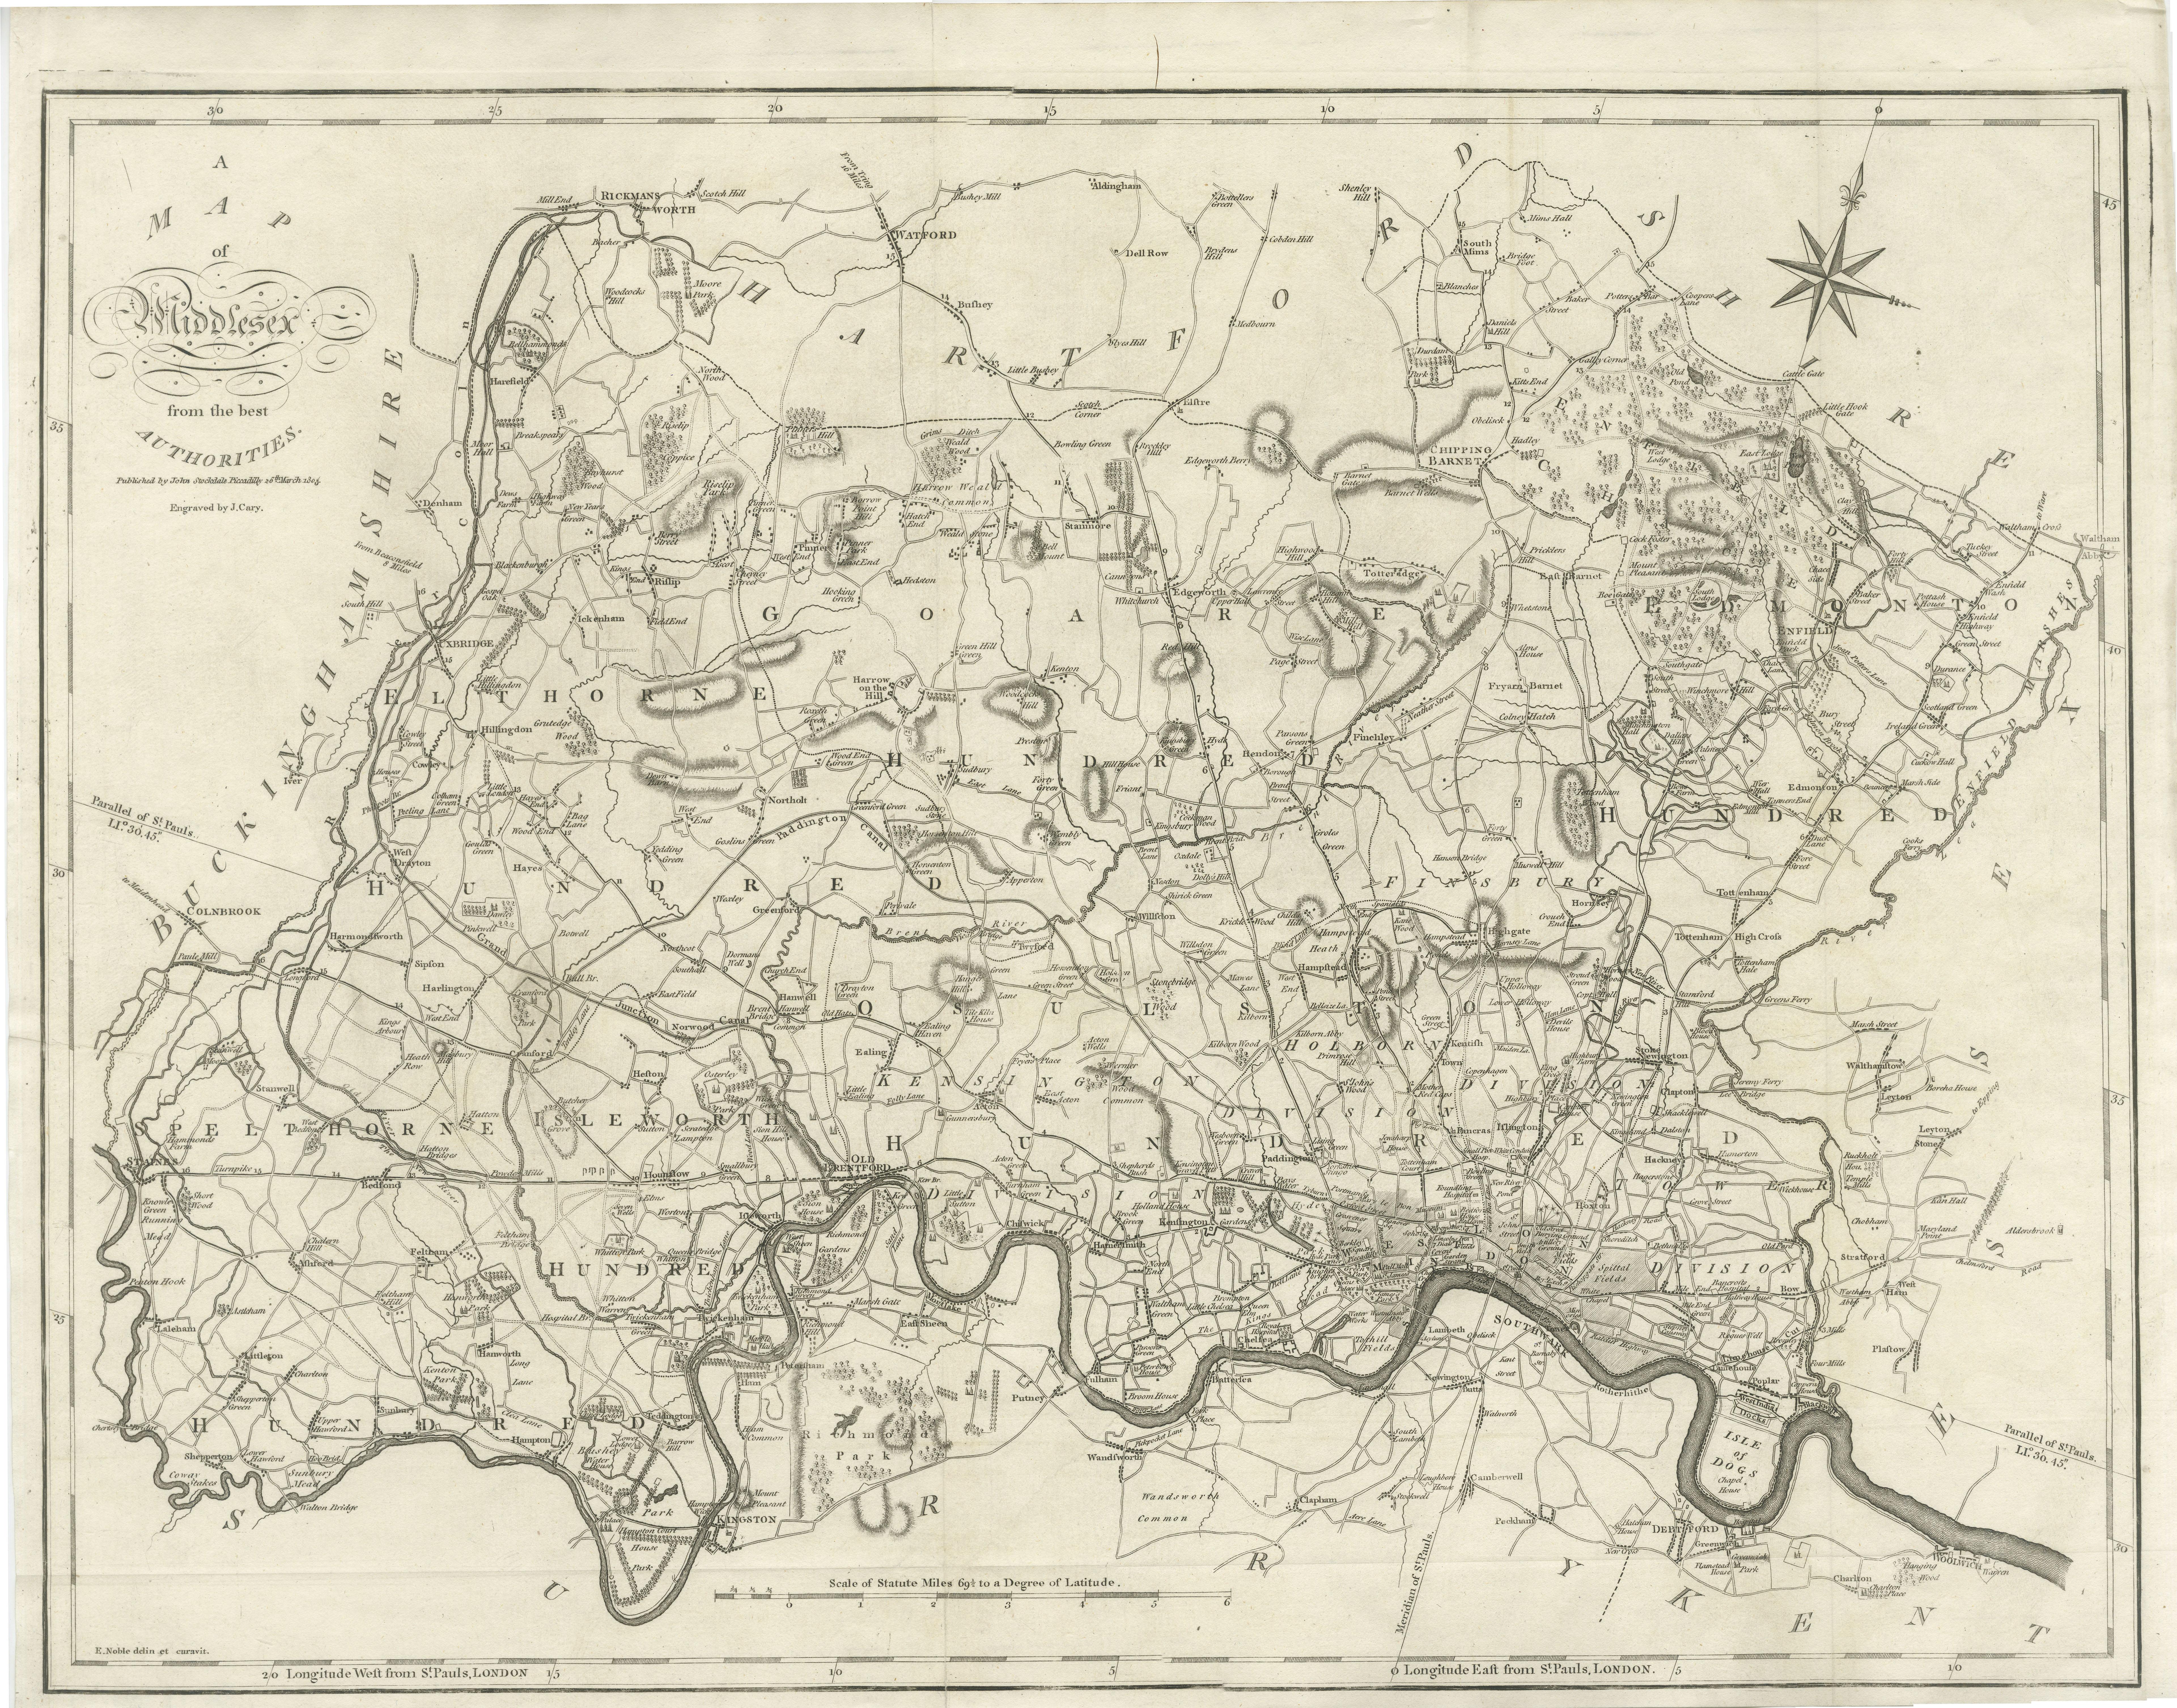 Antique map titled 'A Map of Middlesex from the best Authorities'. Original old county map of Middlesex, England. Engraved by John Cary. Originates from 'New British Atlas' by John Stockdale, published 1805. 

John Cary (1755-1835) was a British